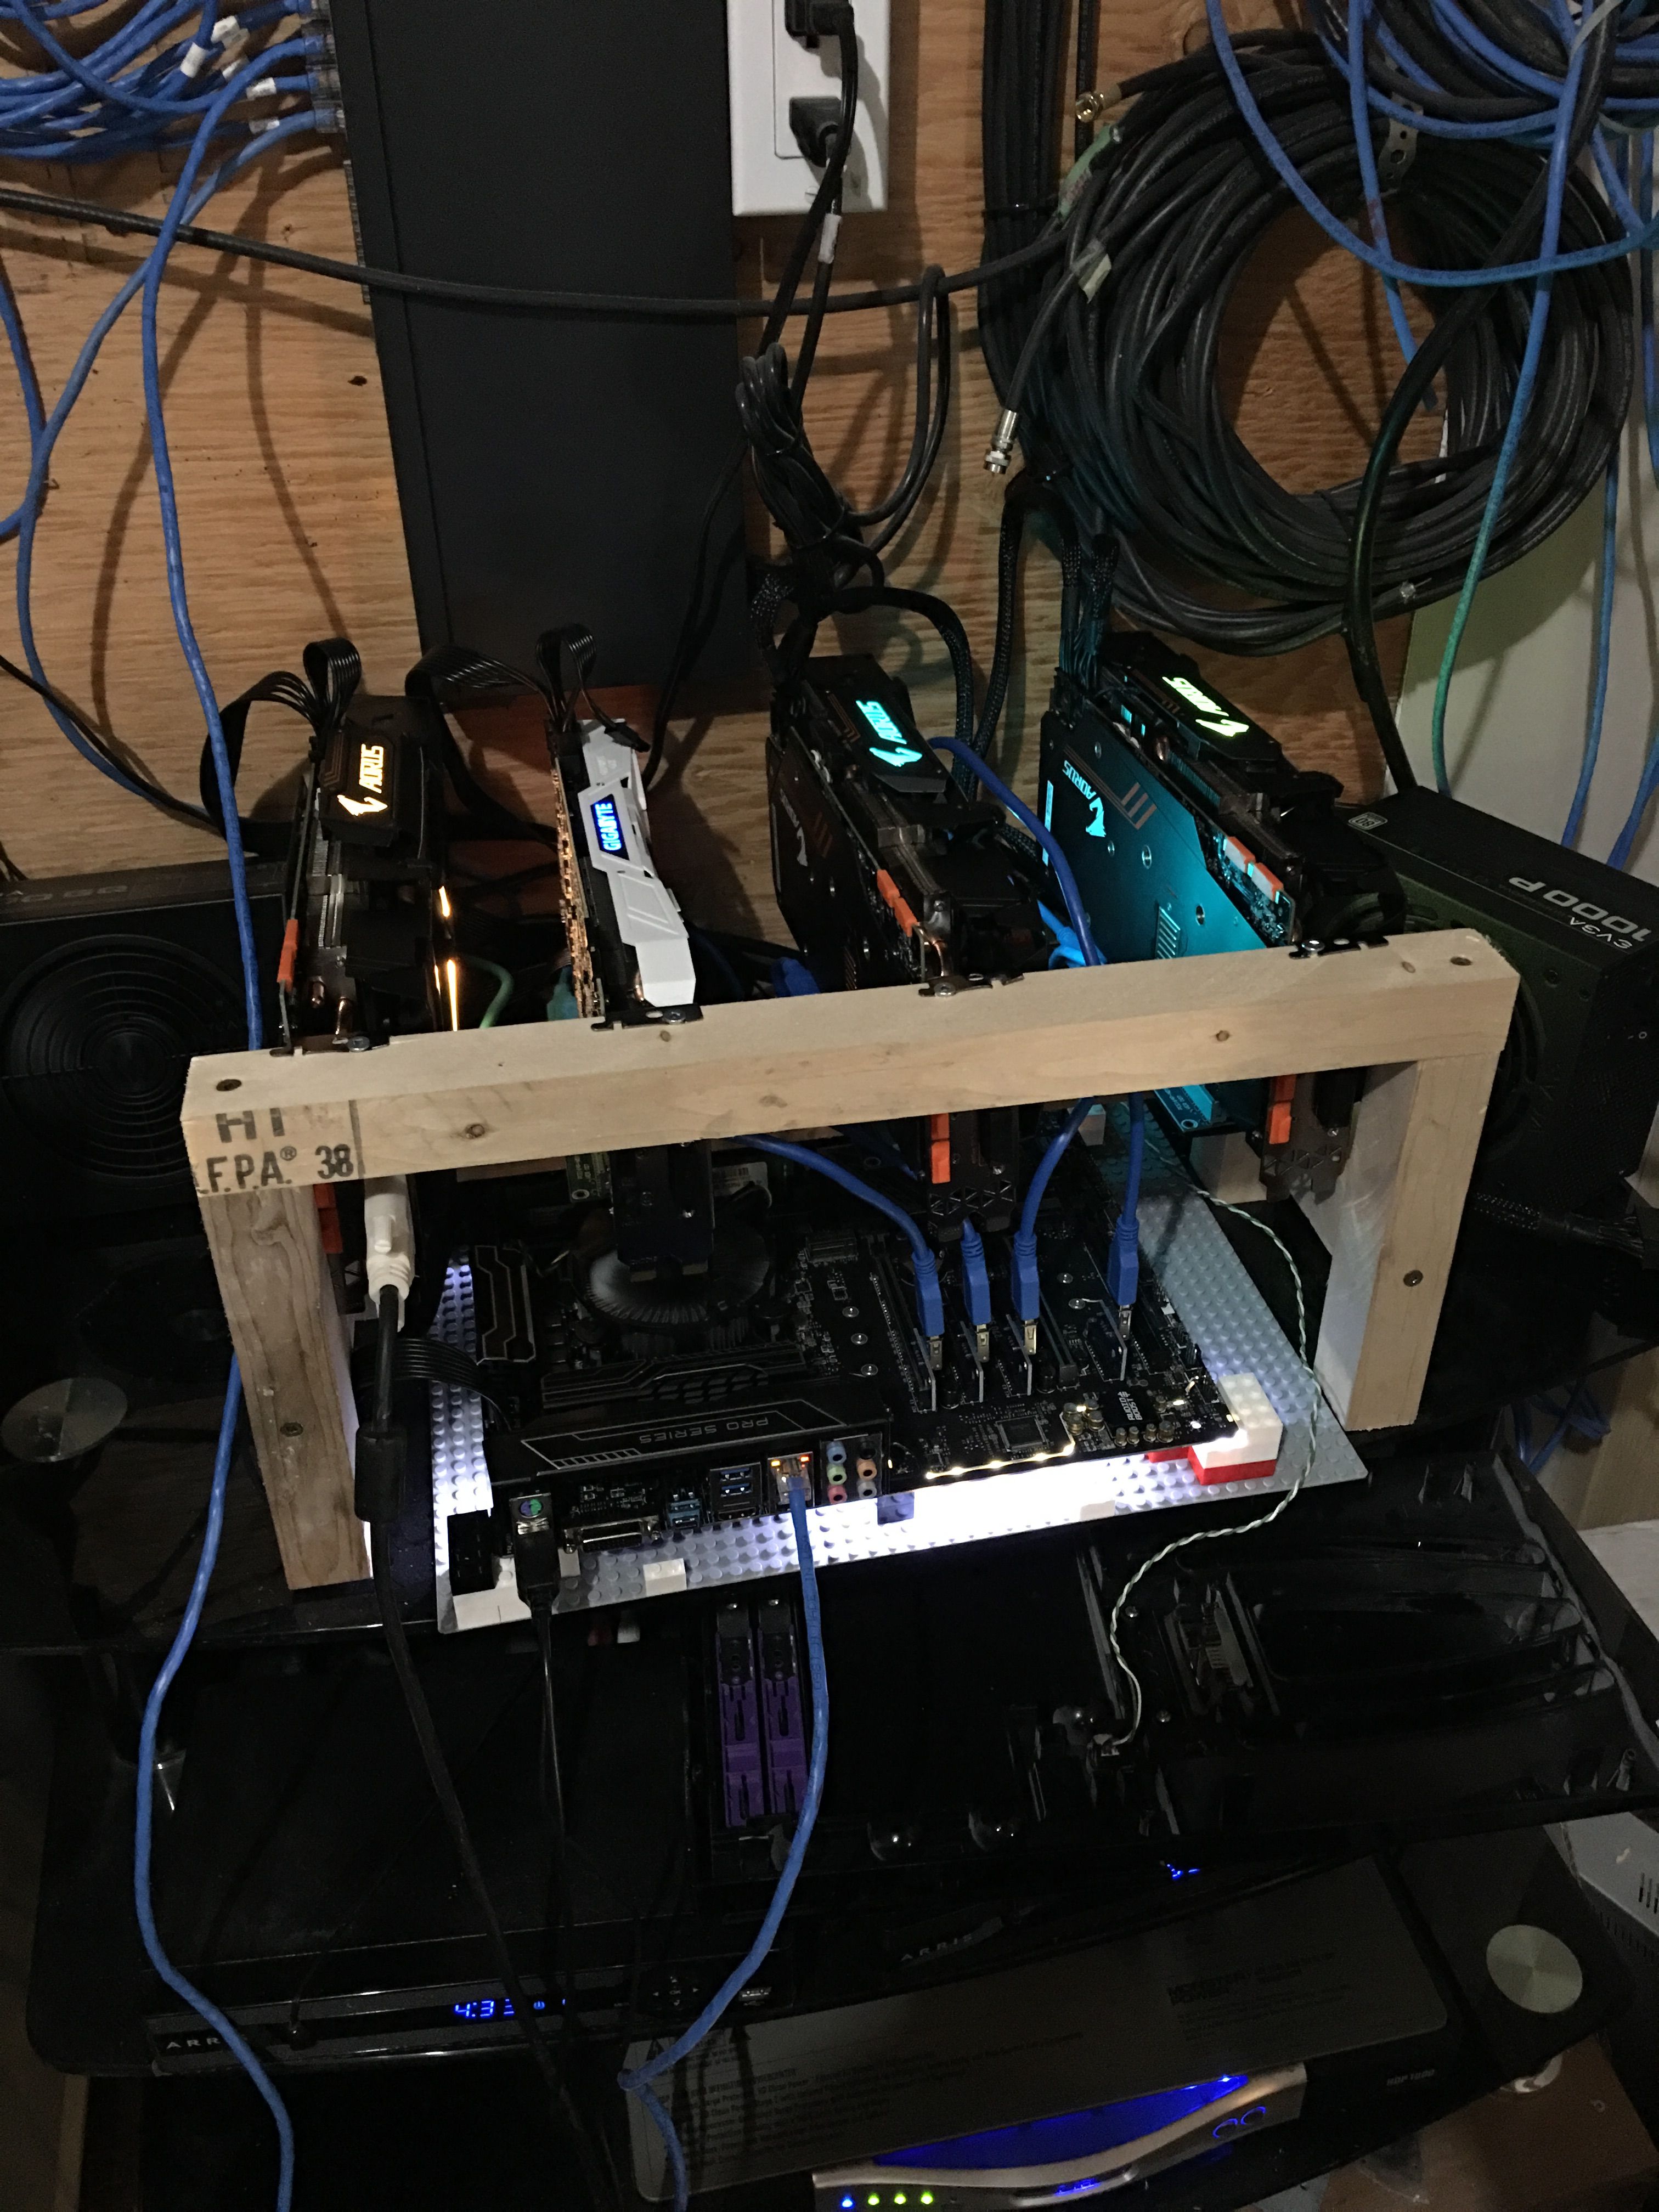 How to Build a 6 GPU Mining Rig – Part 1: Hardware [2019]